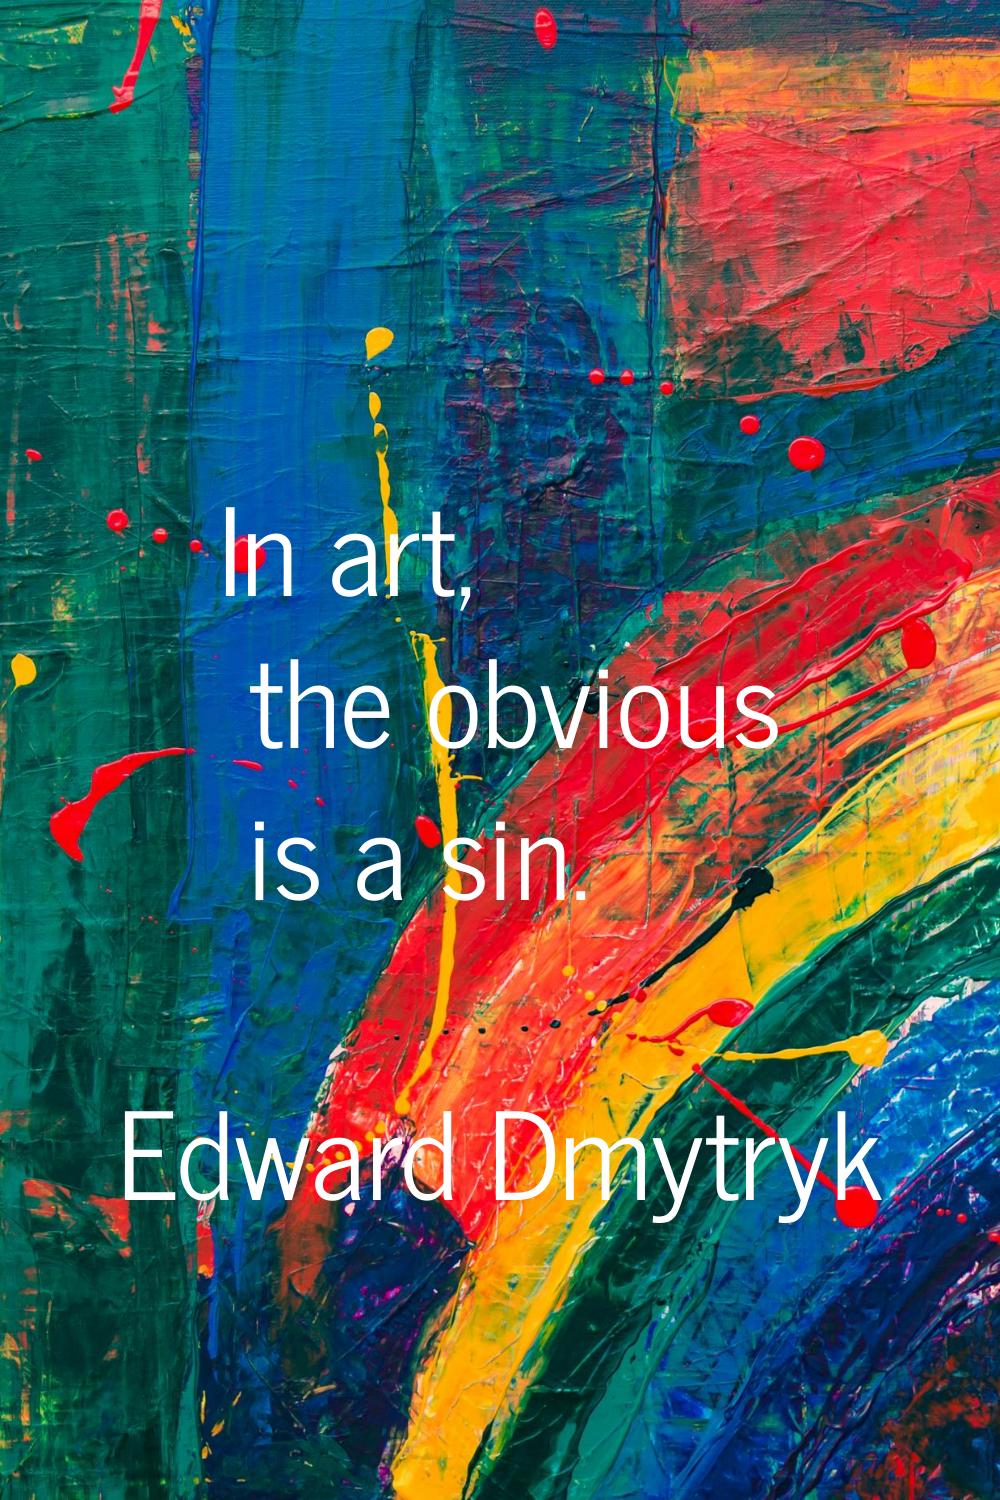 In art, the obvious is a sin.